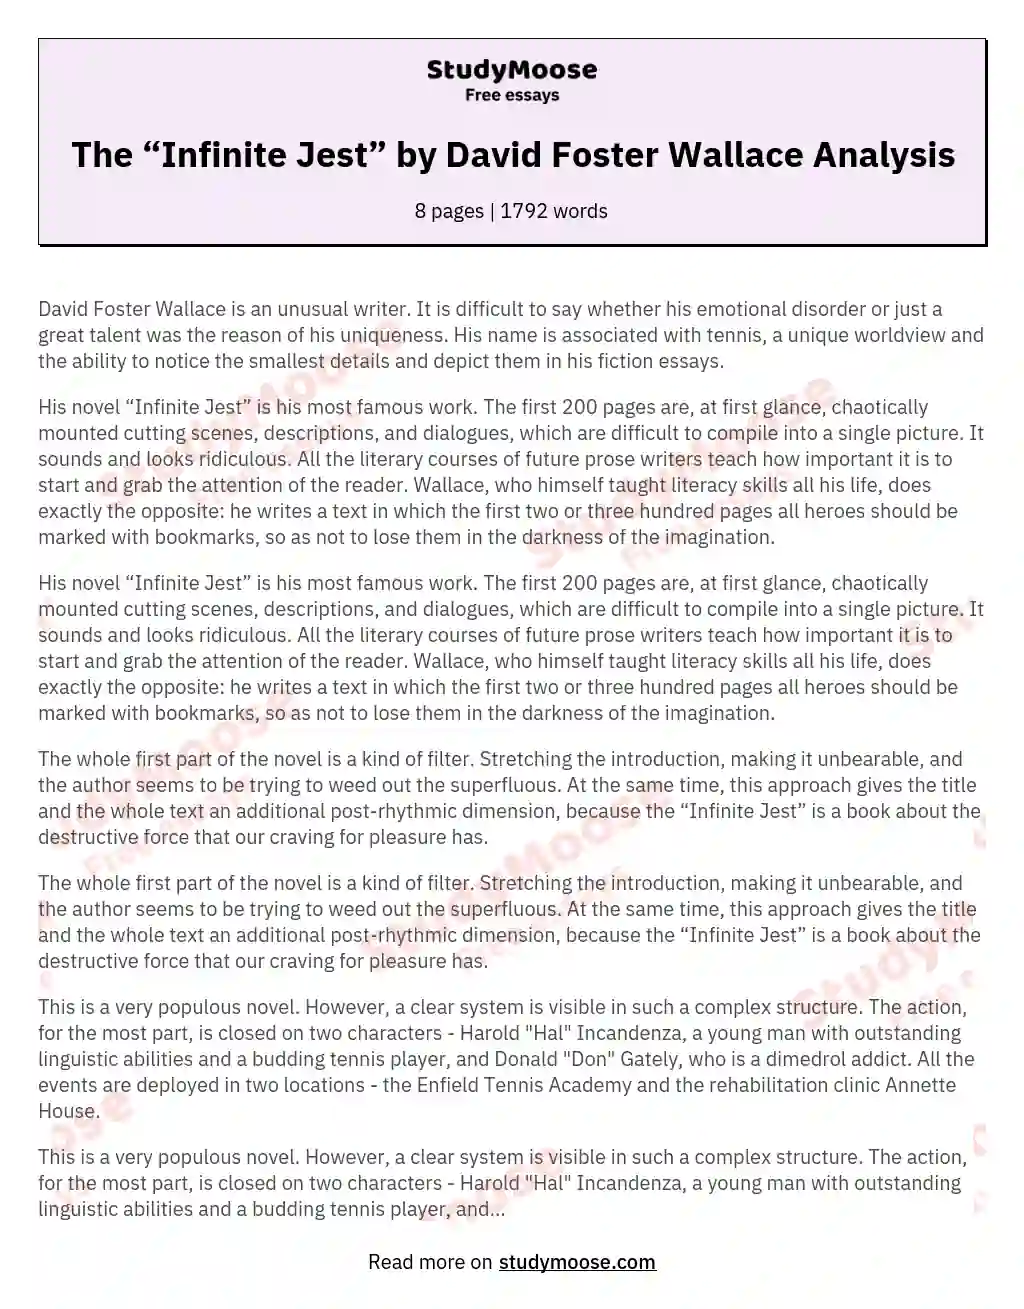 The “Infinite Jest” by David Foster Wallace Analysis essay